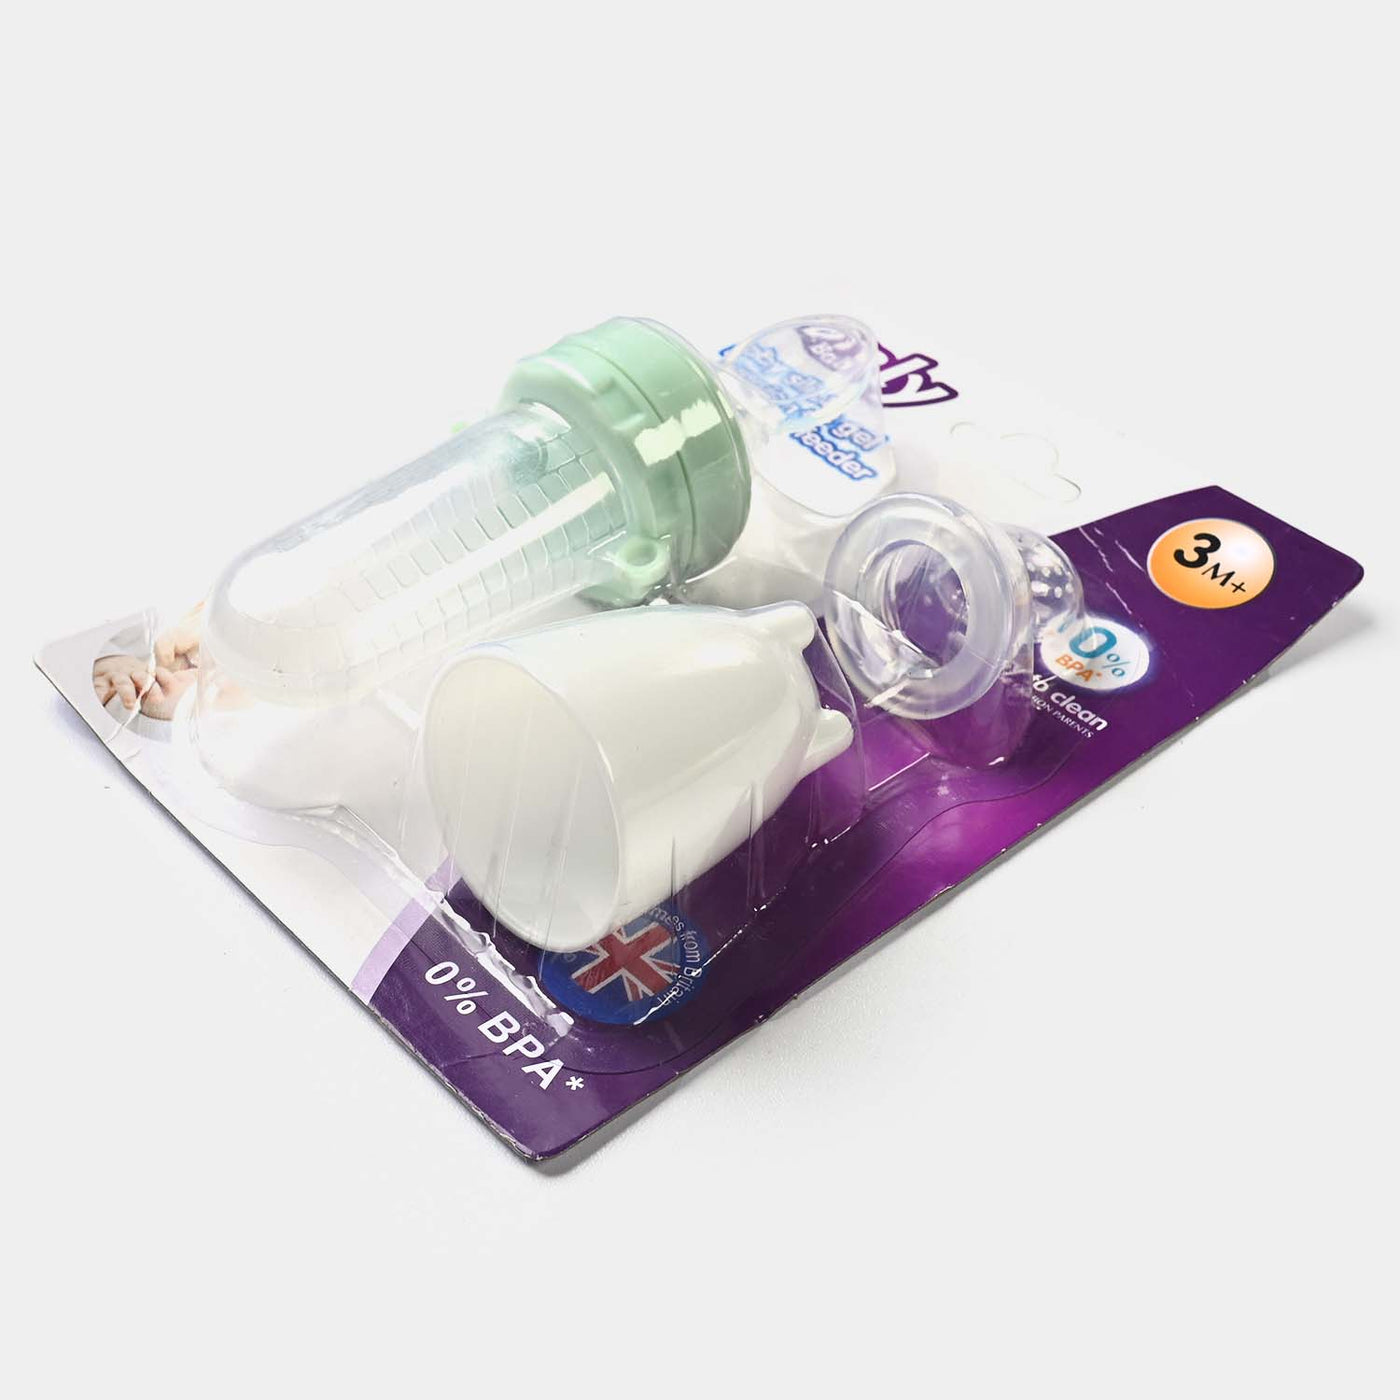 Baby 2 in 1 Silicone Food Feeder & Fruit Feeder Nibbler